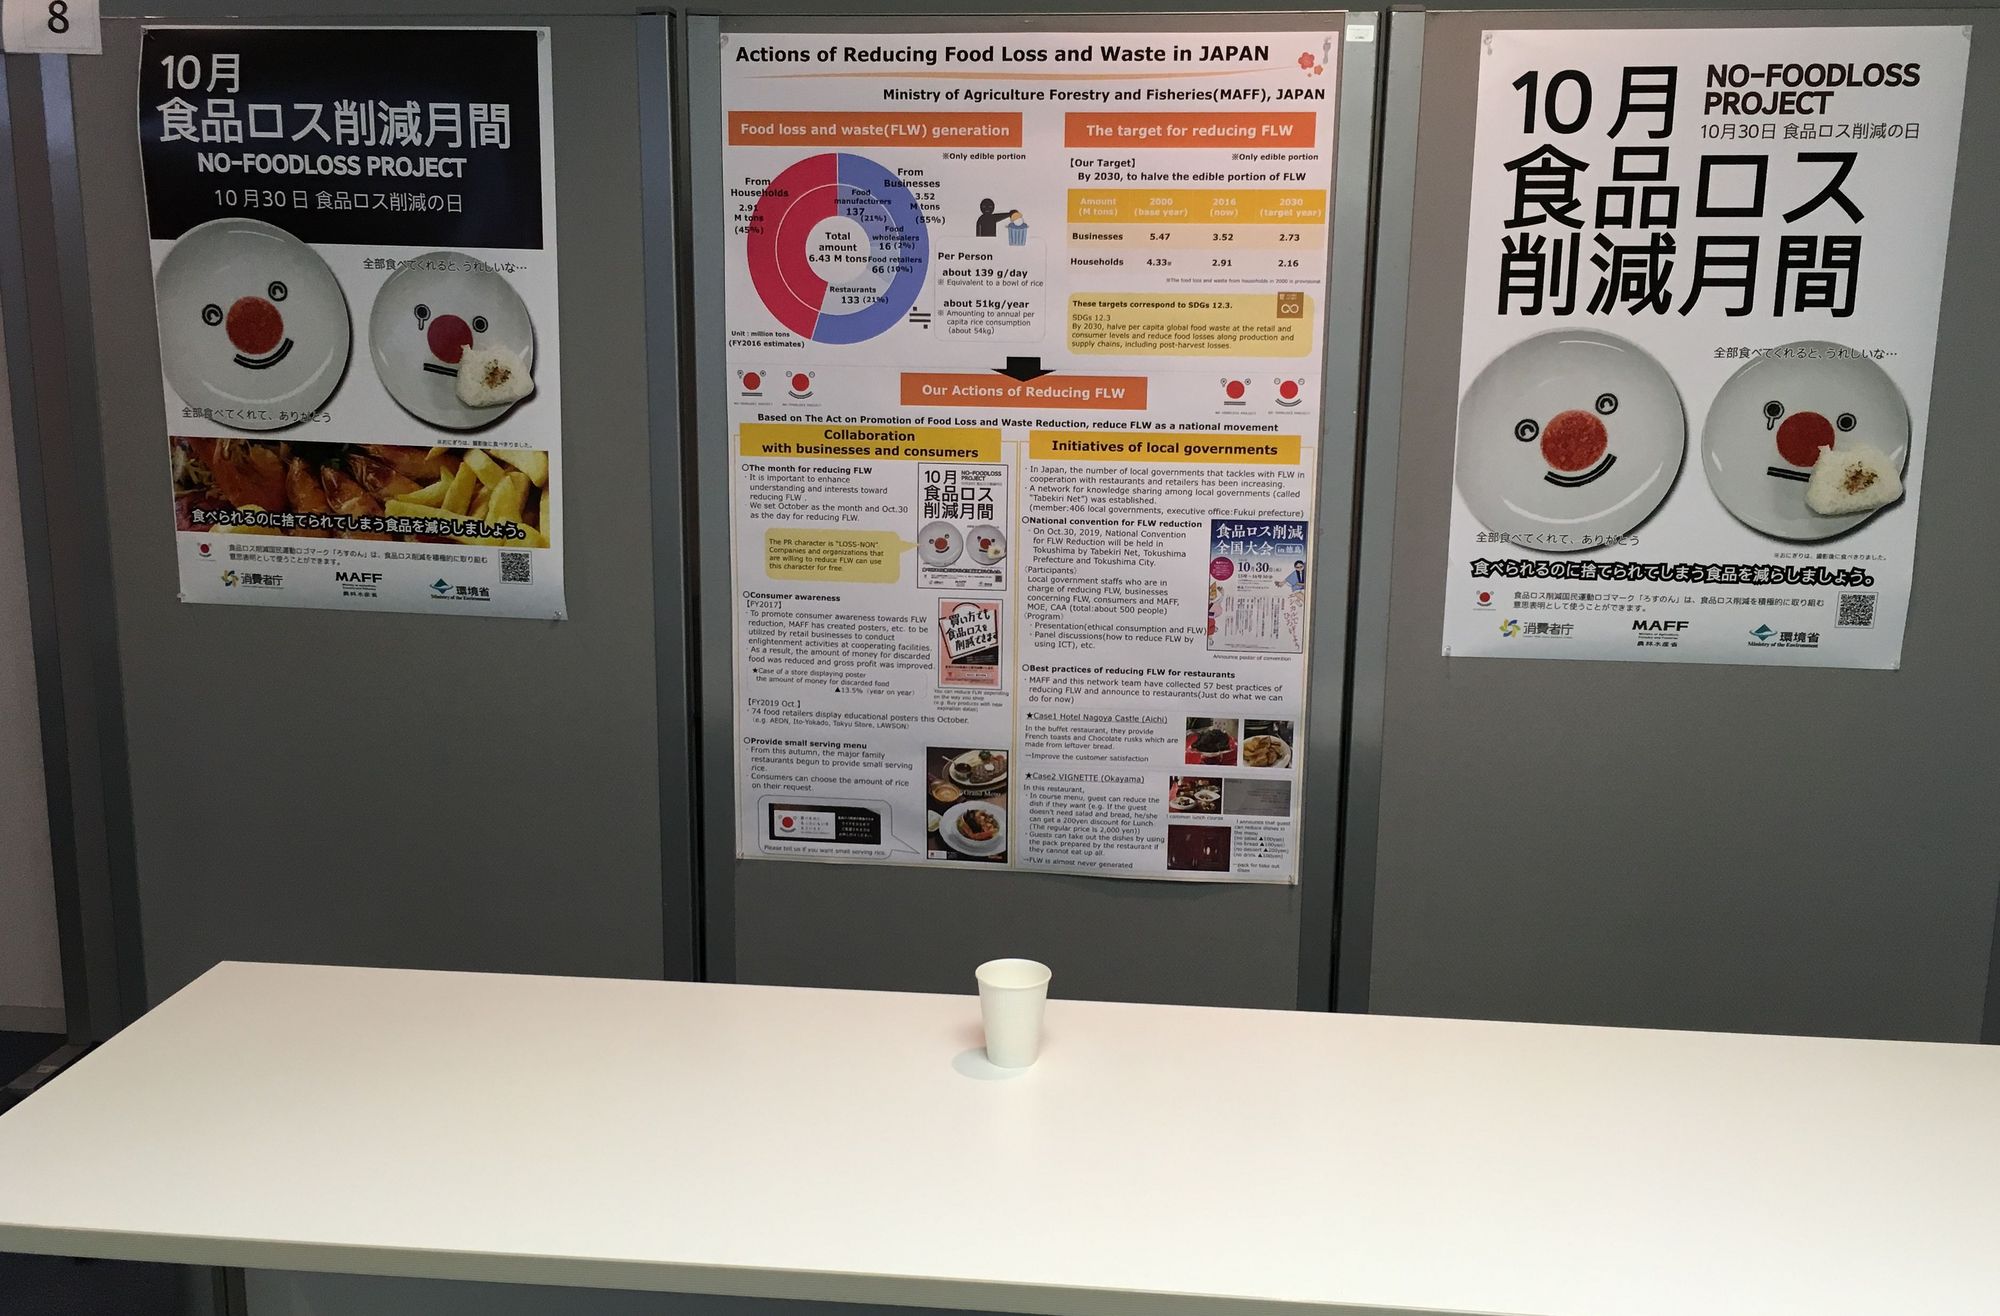 The poster “Reducing food loss and waste in Japan” was provided by Ms. Hiroko Miura and Mr. Yuji Sato from Ministry of Agriculture, Forestry and Fisheries (MAFF) of Japan.